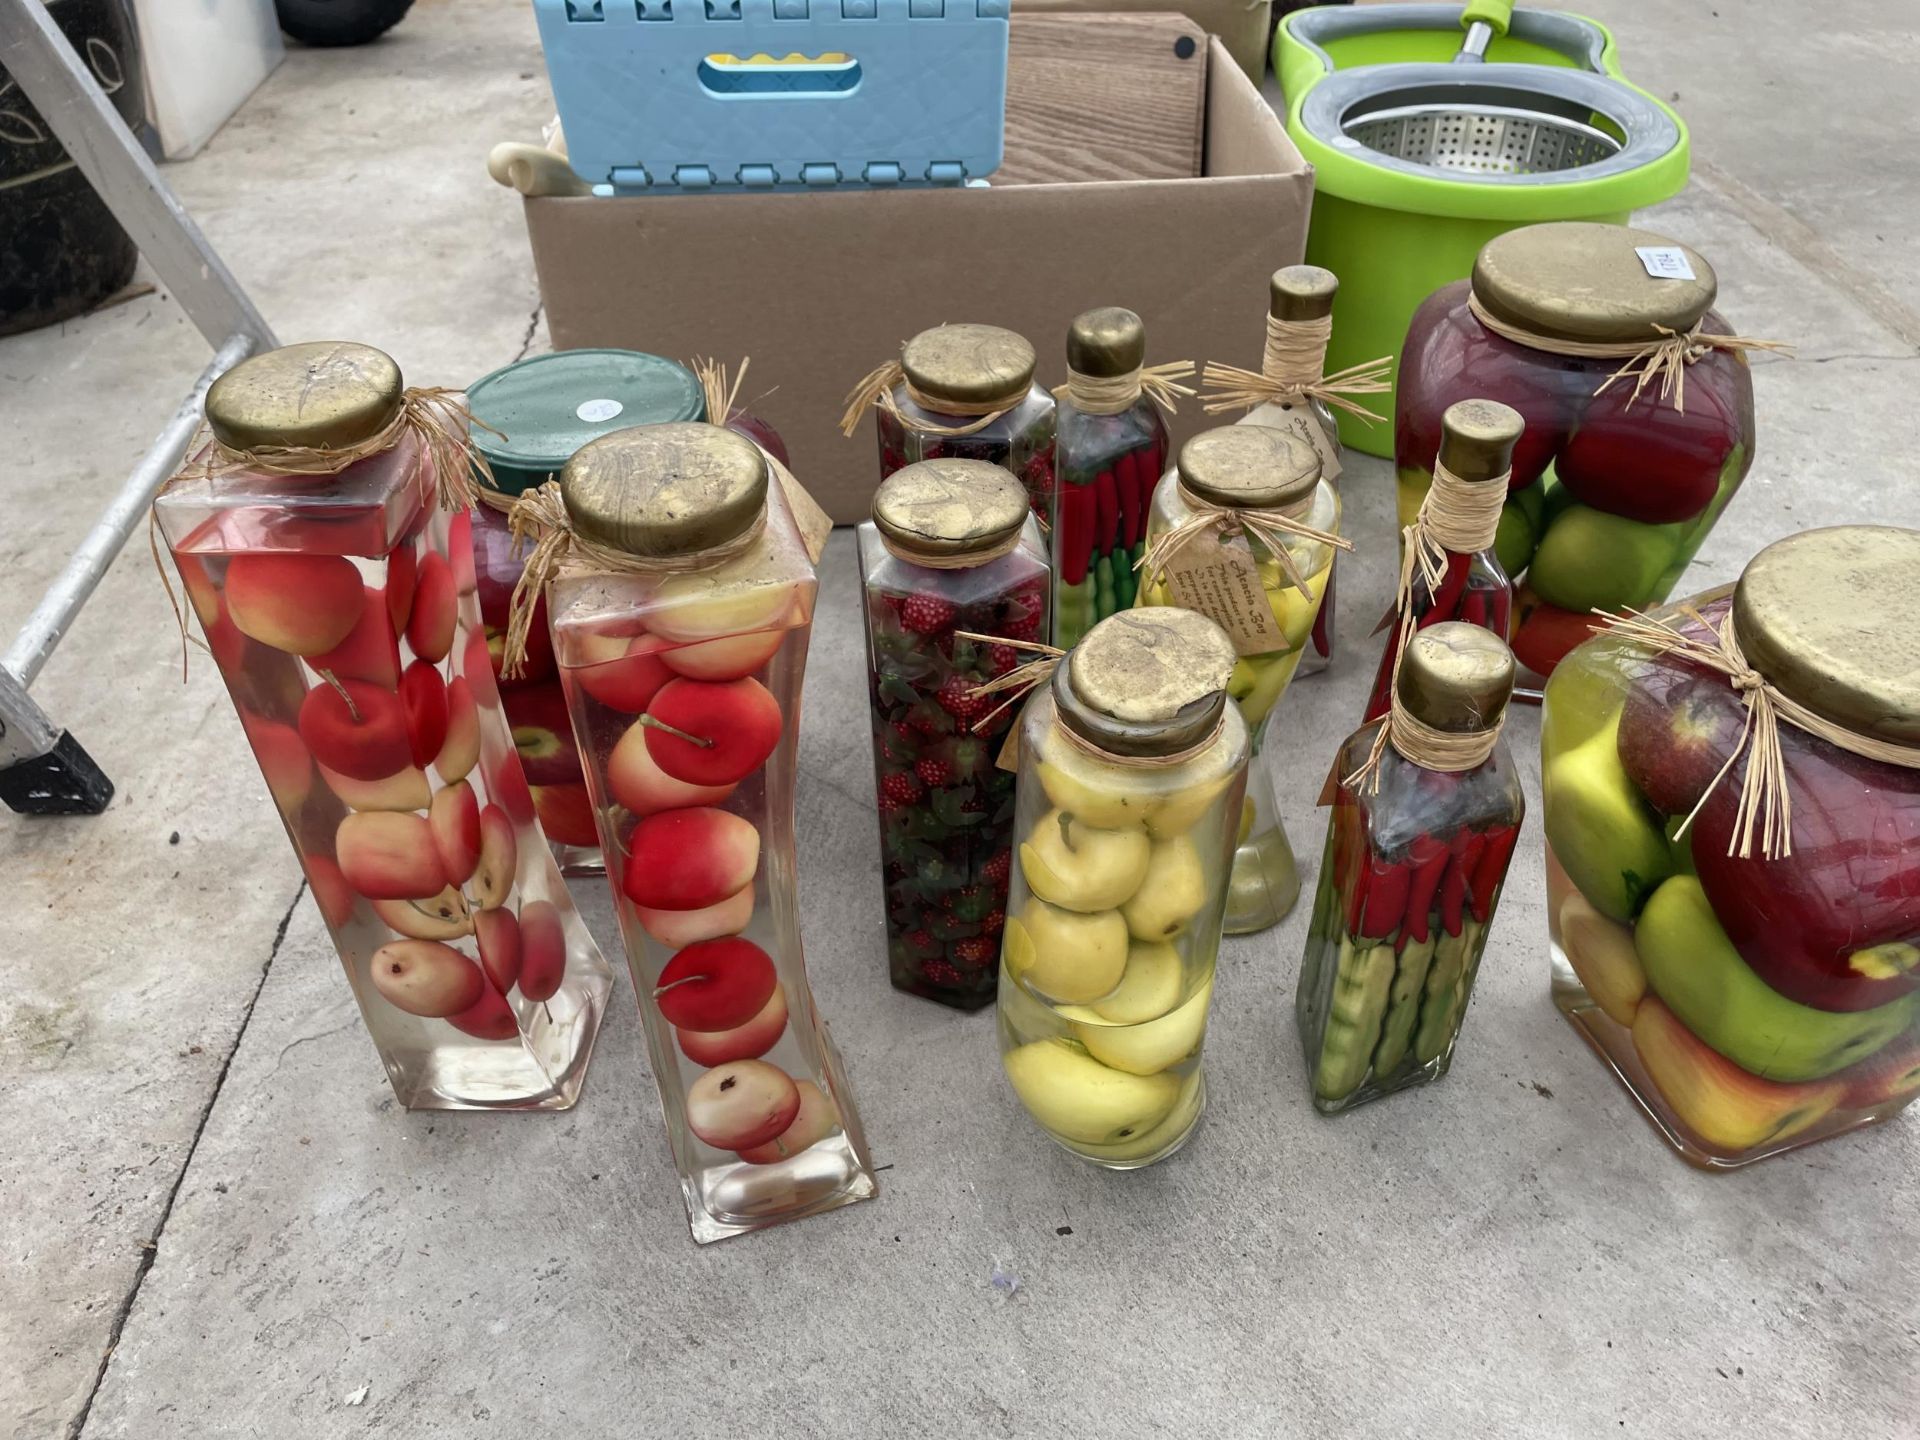 AN ASSORTMENT OF DECORATIVE STORAGE JARS CONTAINING ARTIFICIAL FRUIT - Image 3 of 6